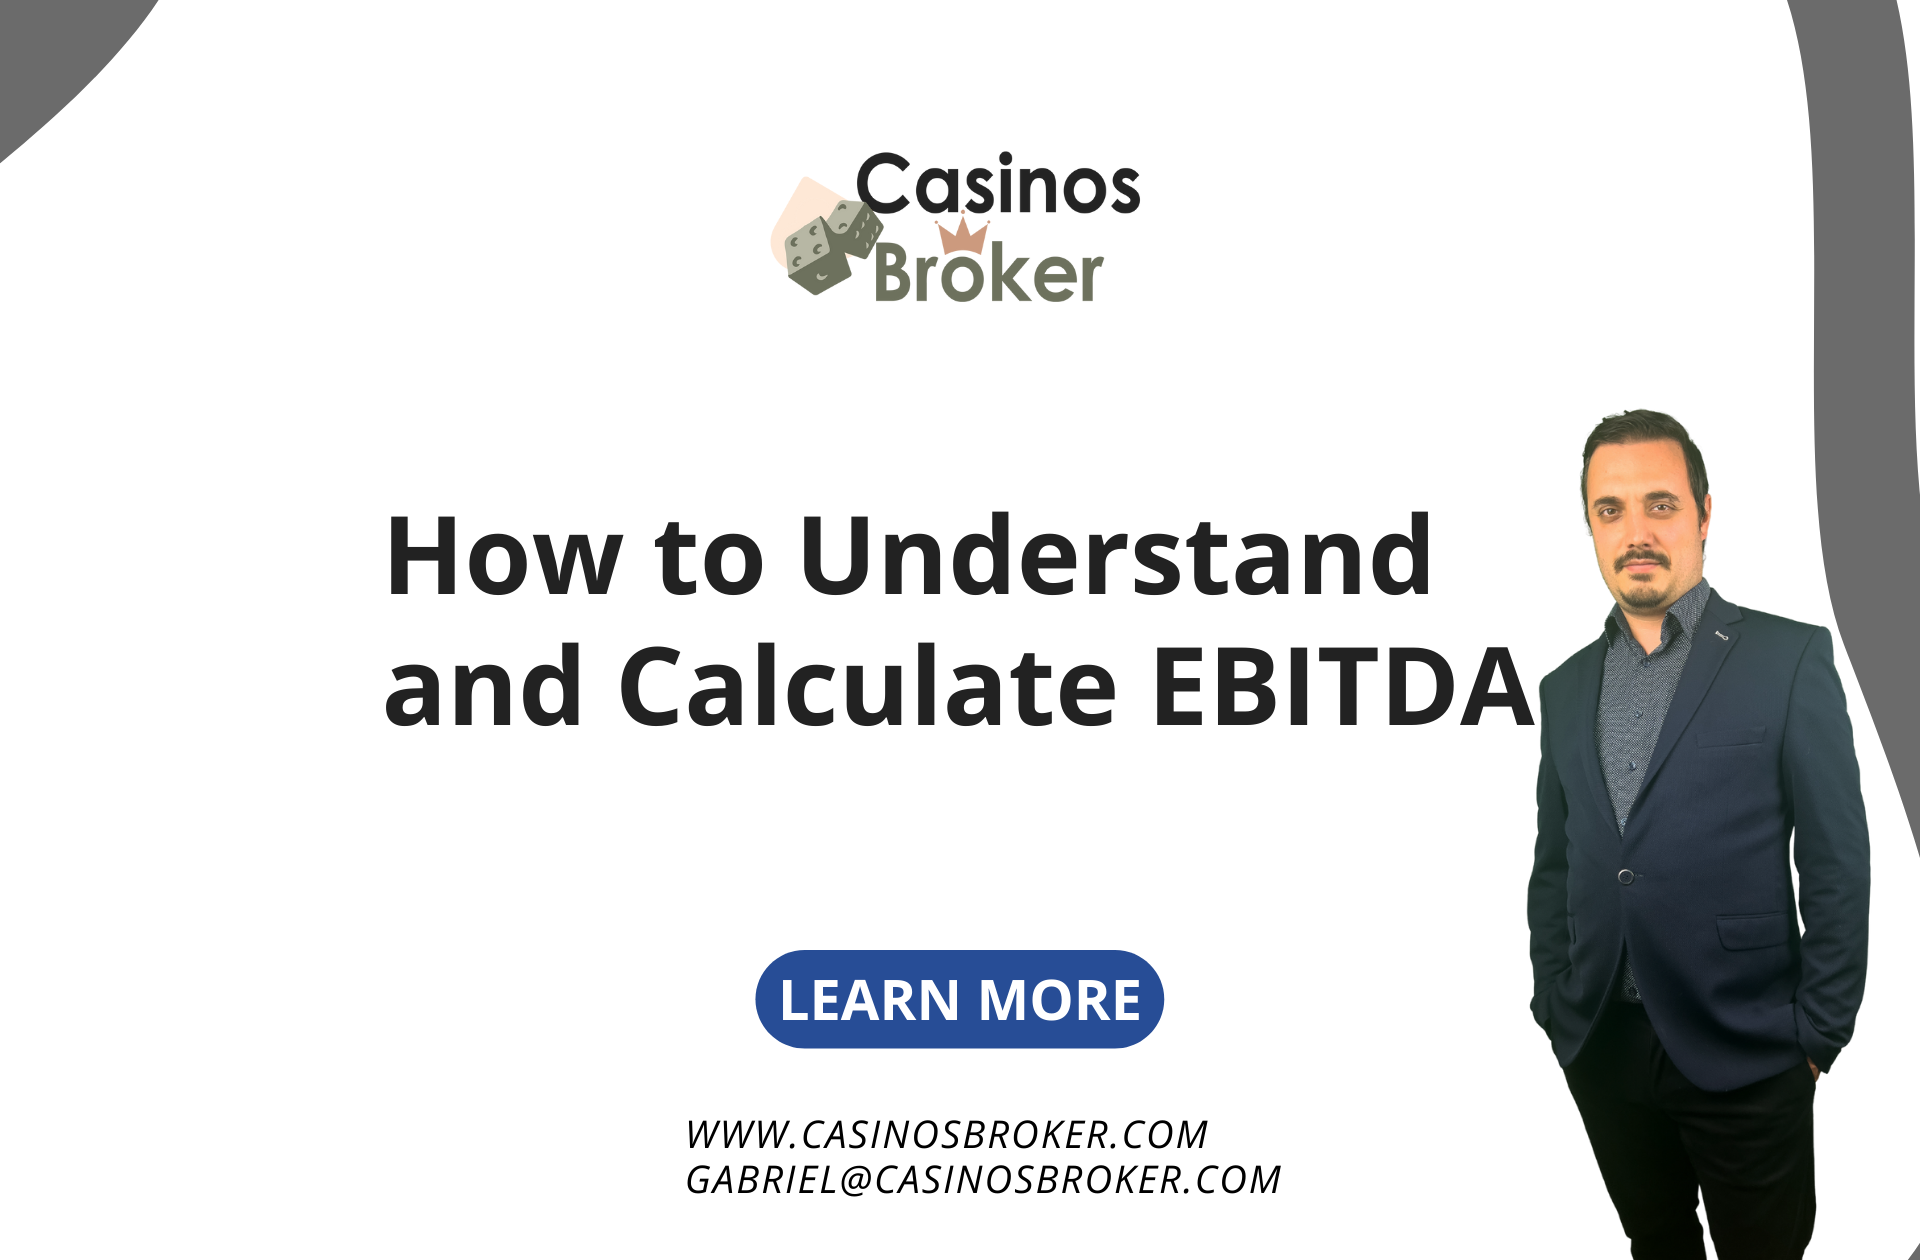 How to Understand and Calculate EBITDA